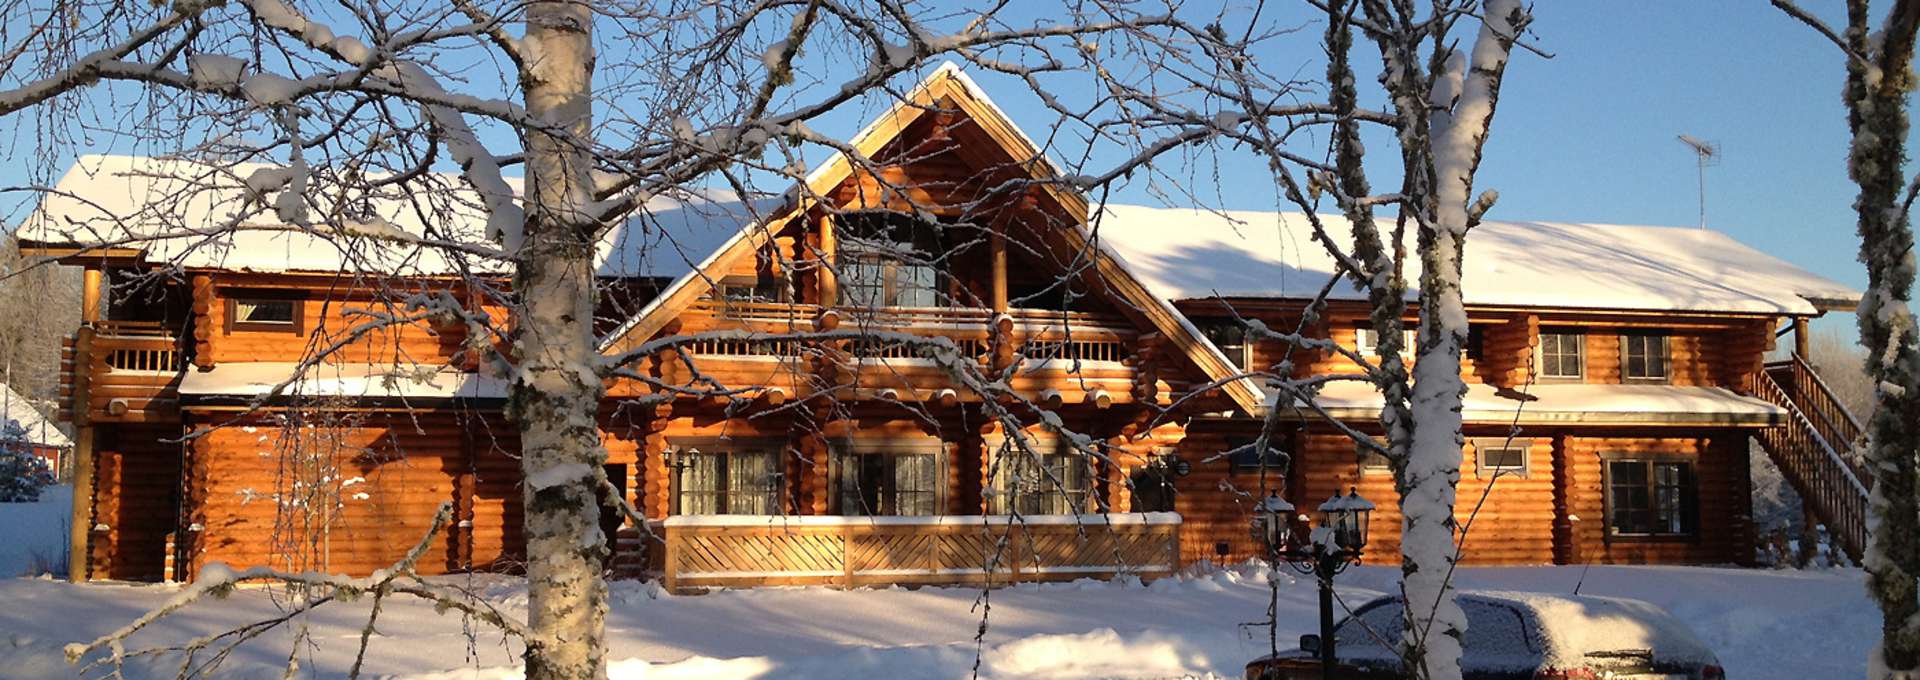 A timber hotel in the winter